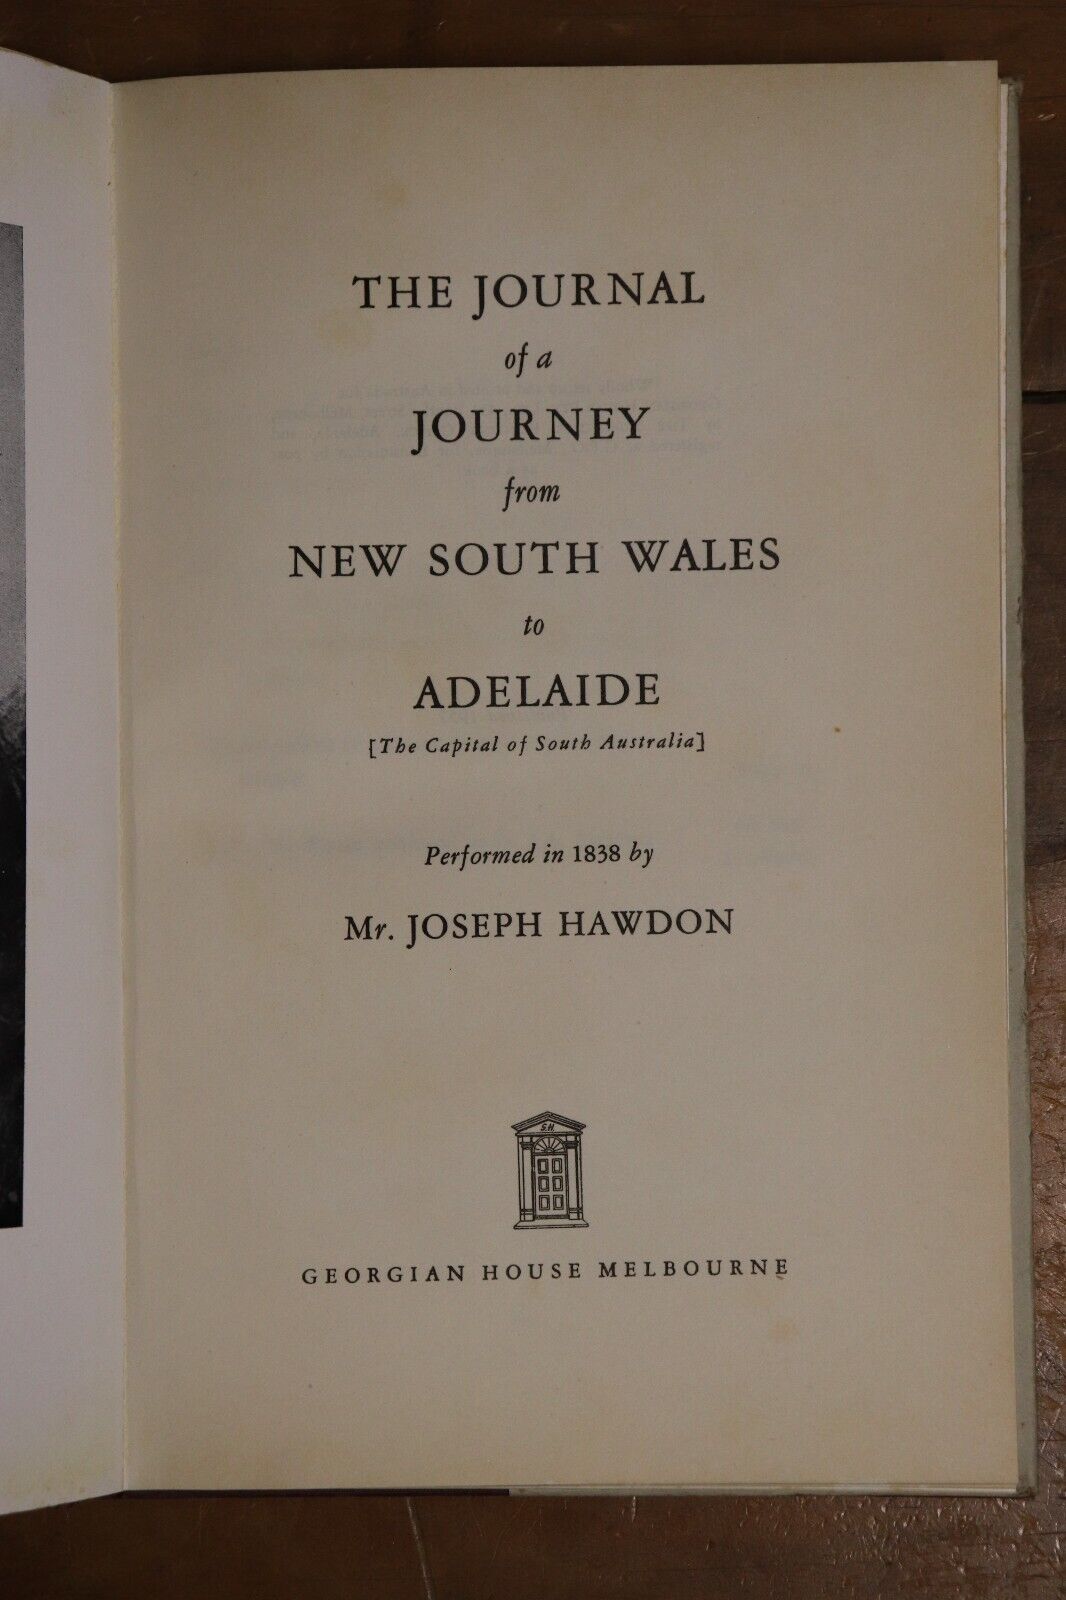 Journal Of A Journey From NSW To Adelaide - 1952 - Australian History Book